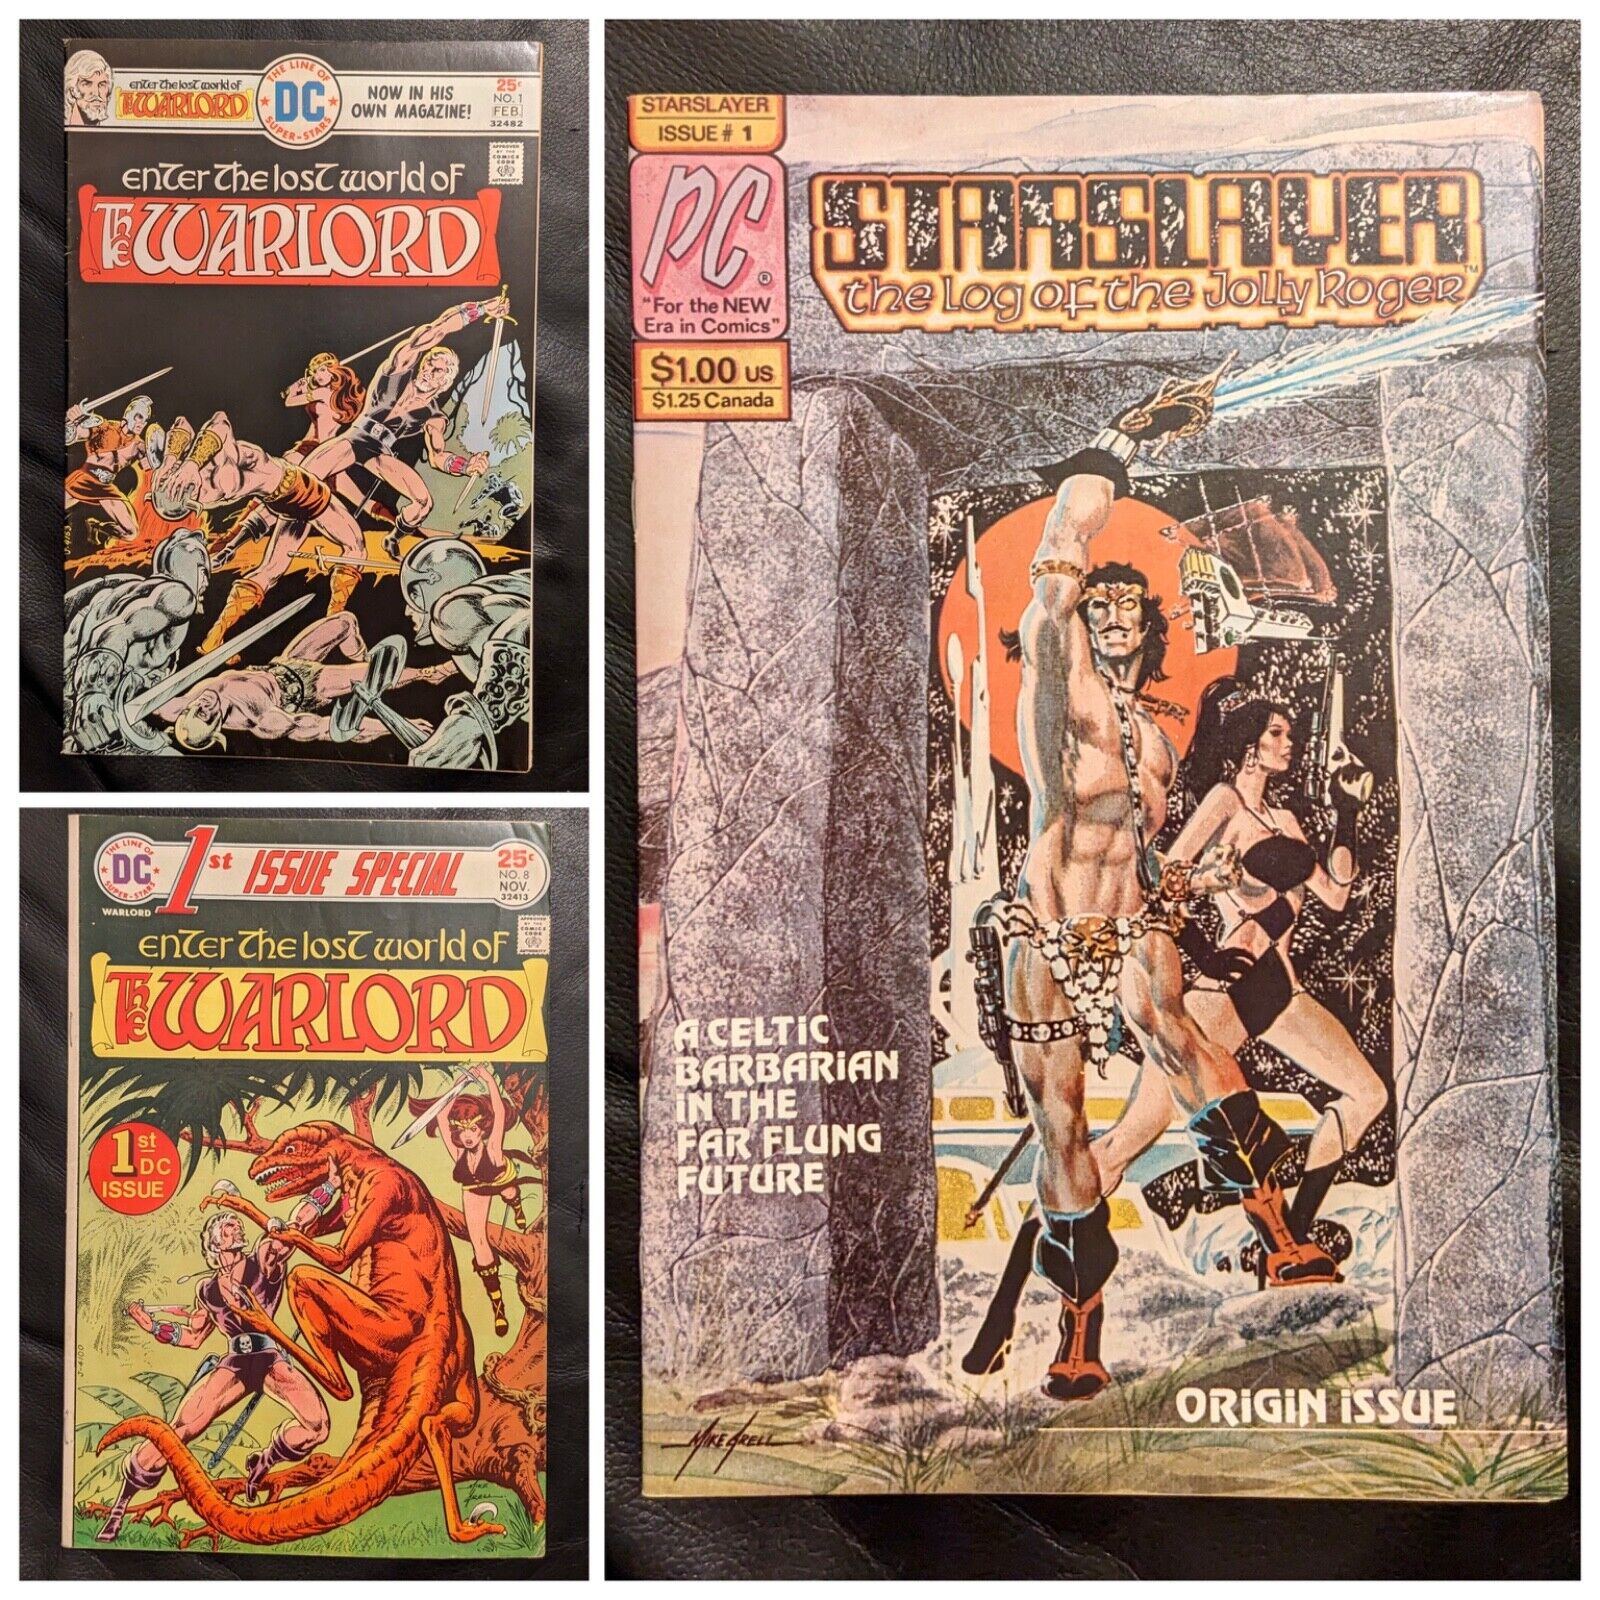 Mike Grell SET DC 1st Issue Special #8 1st WARLORD, WARLORD #1, STARSLAYER #1